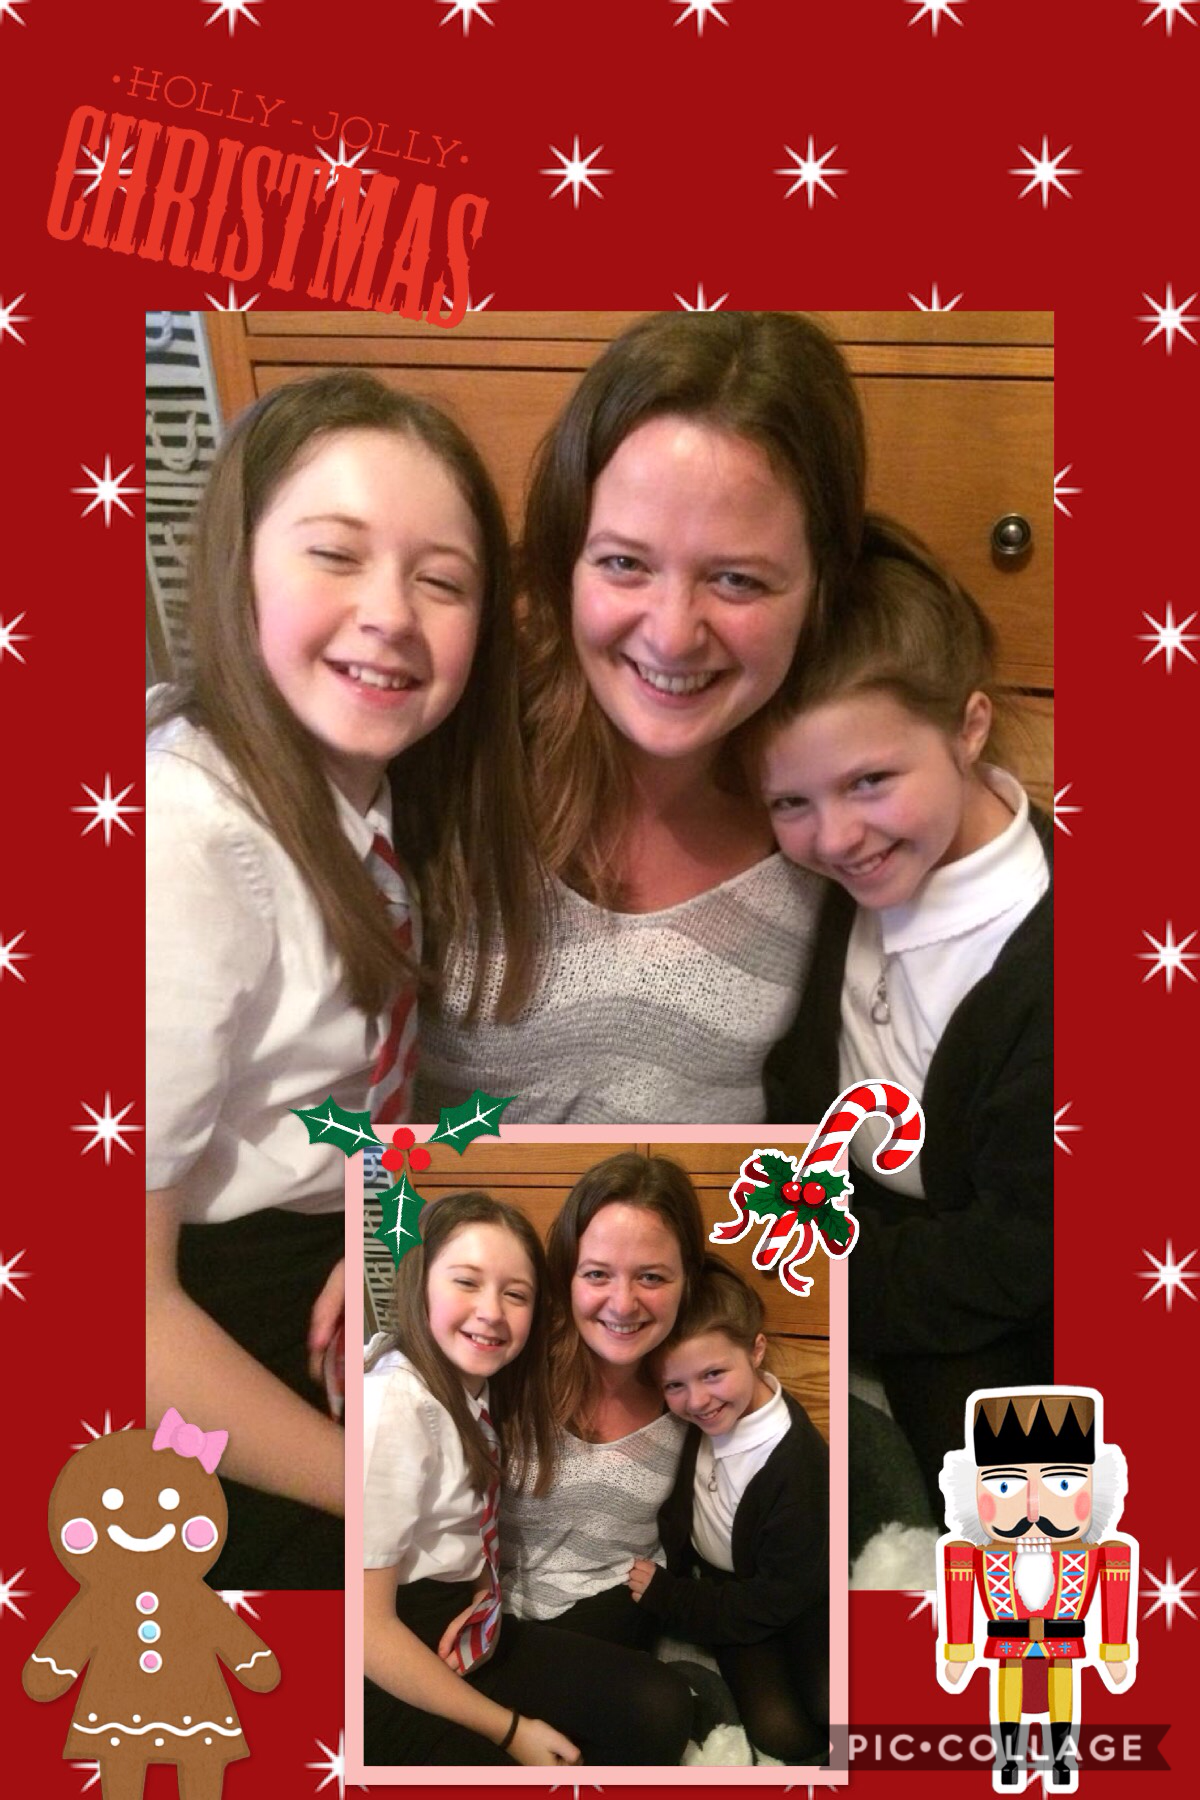 Holly jolly Christmas this year # sister # nieces 🎄🎁☃️ 